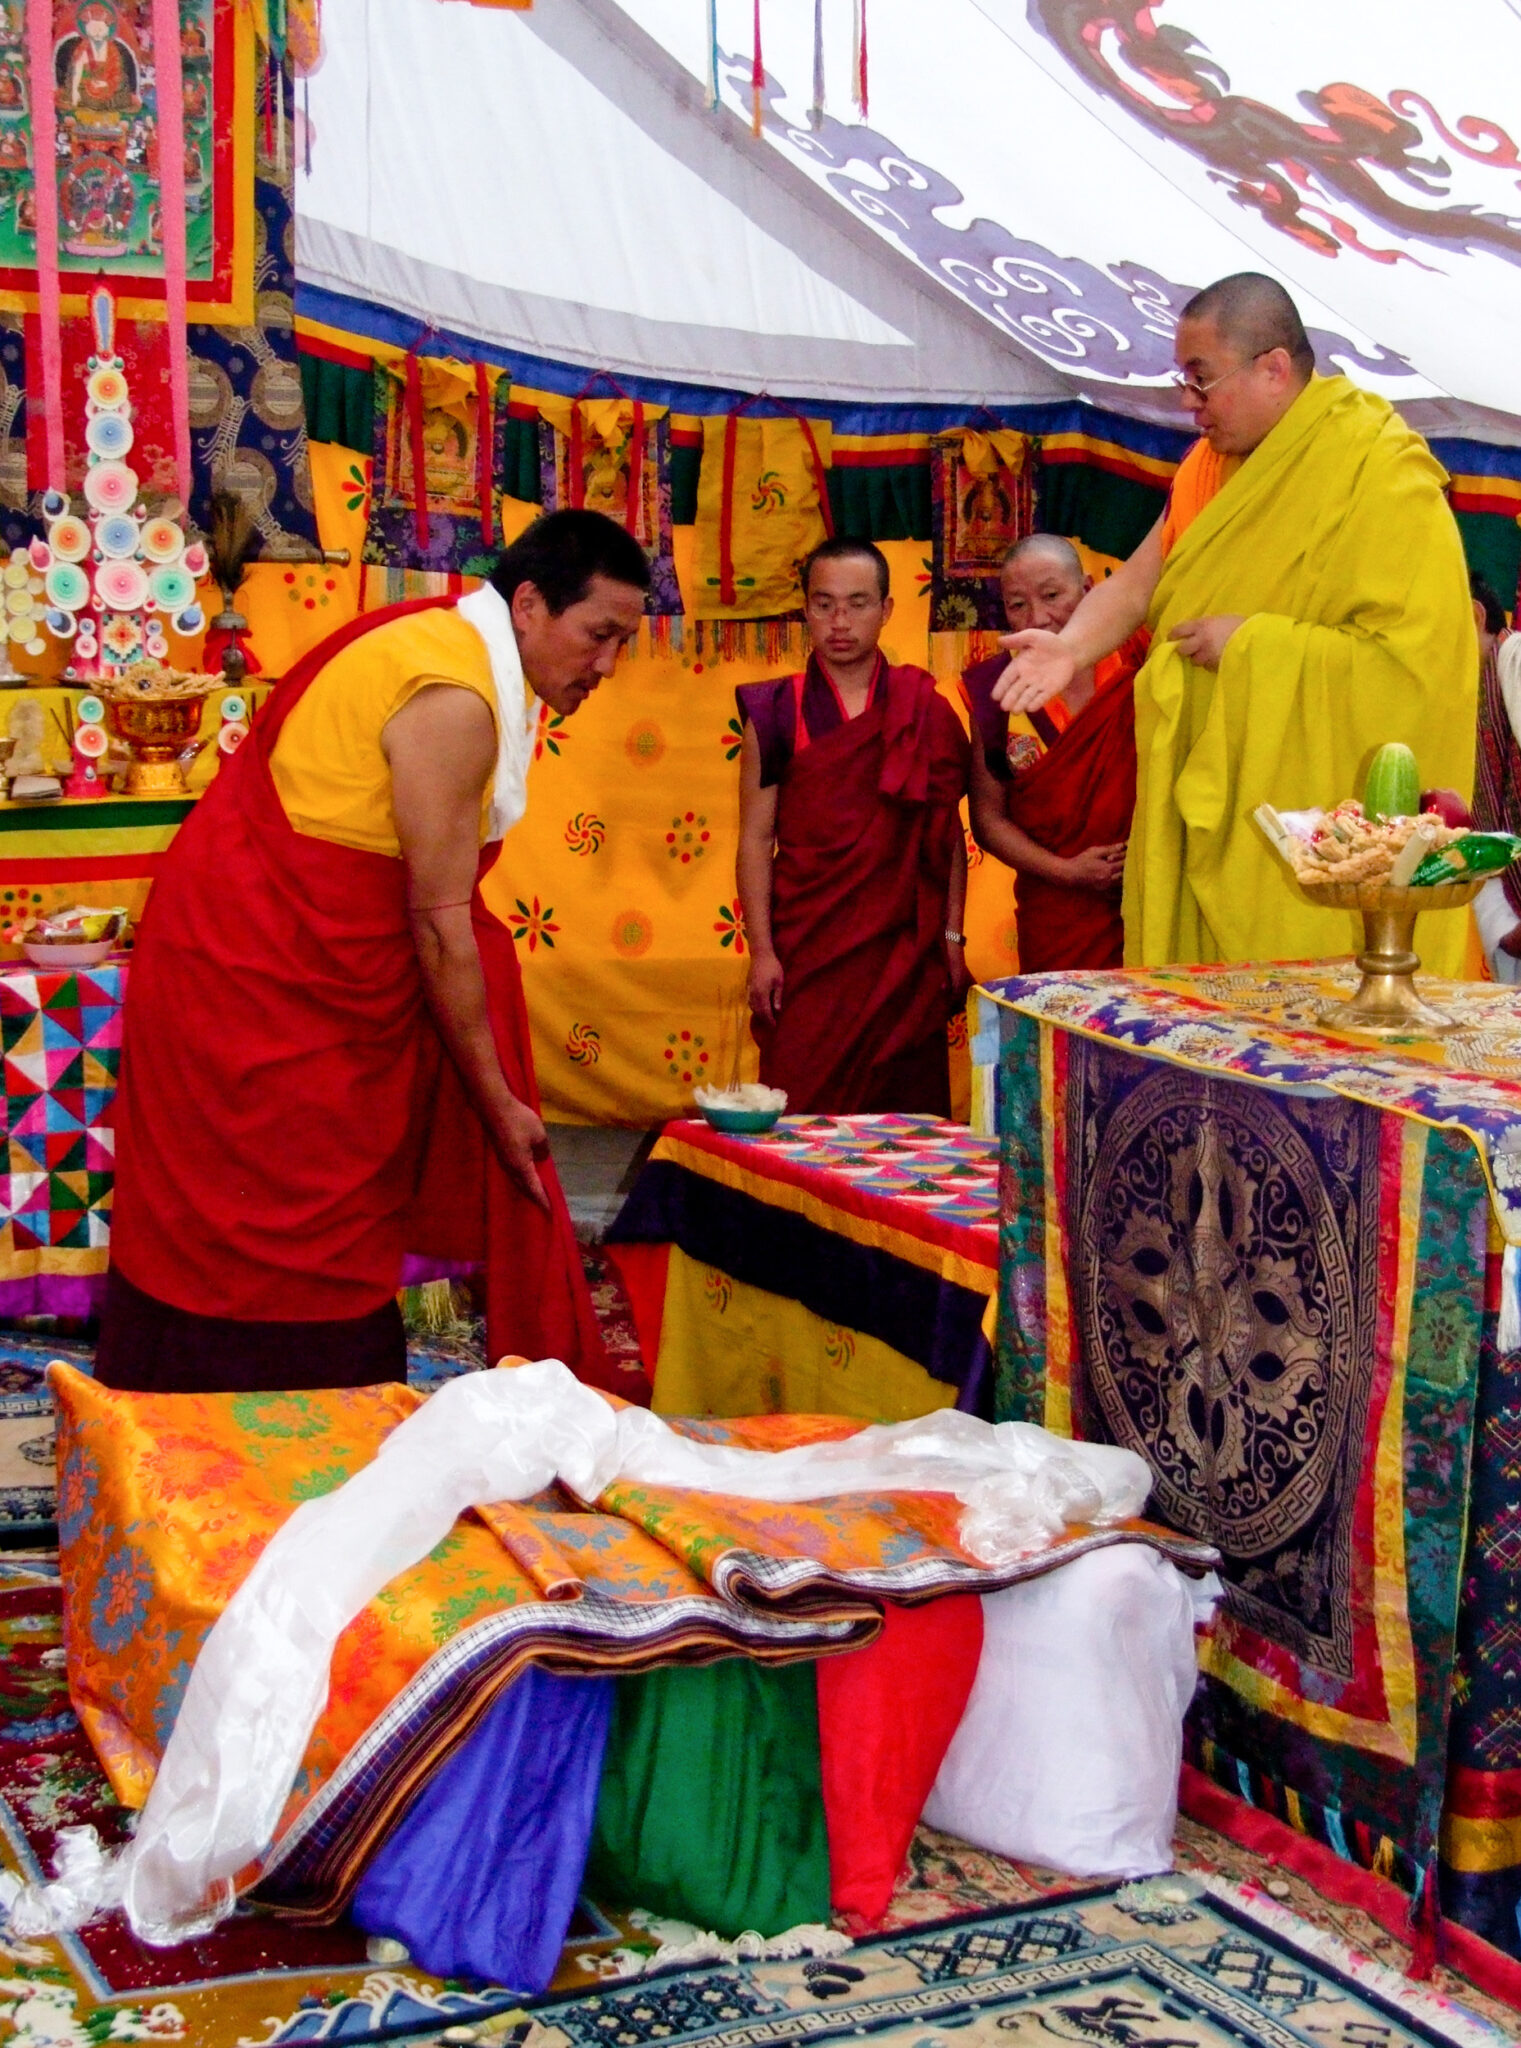 Abbott, in yellow robe, gestures to collection of textiles at base of altar in tent festooned with colorful textiles